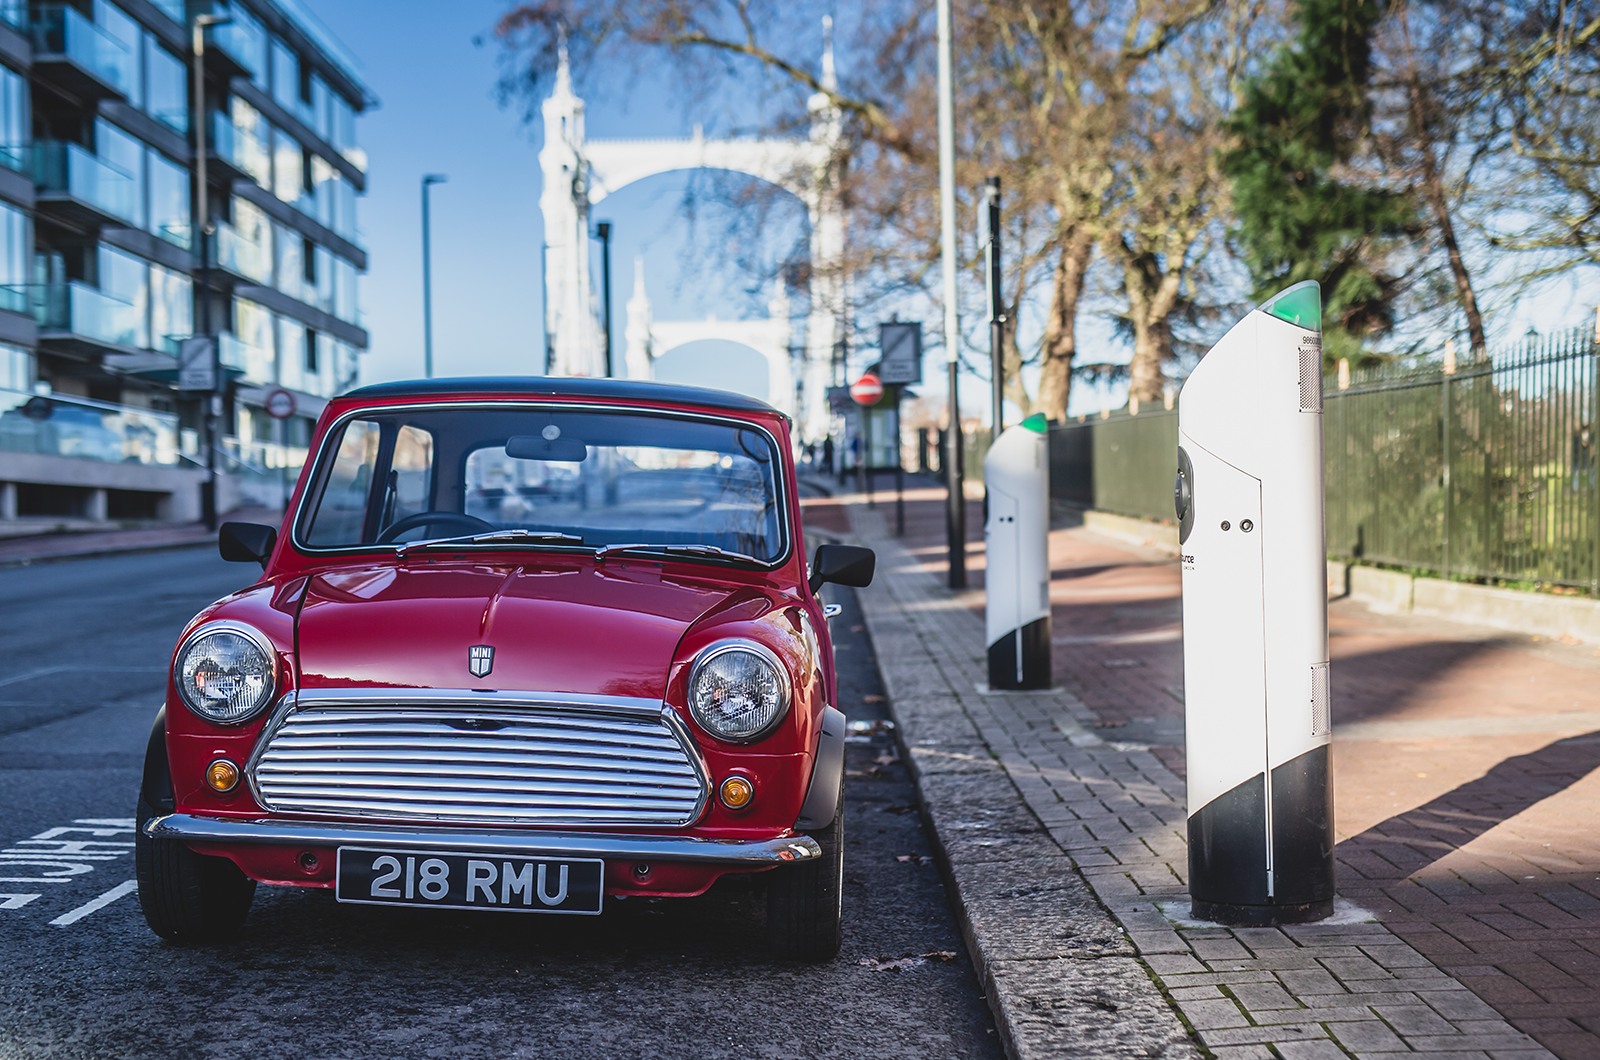 You can now buy a classic Mini with an electric engine